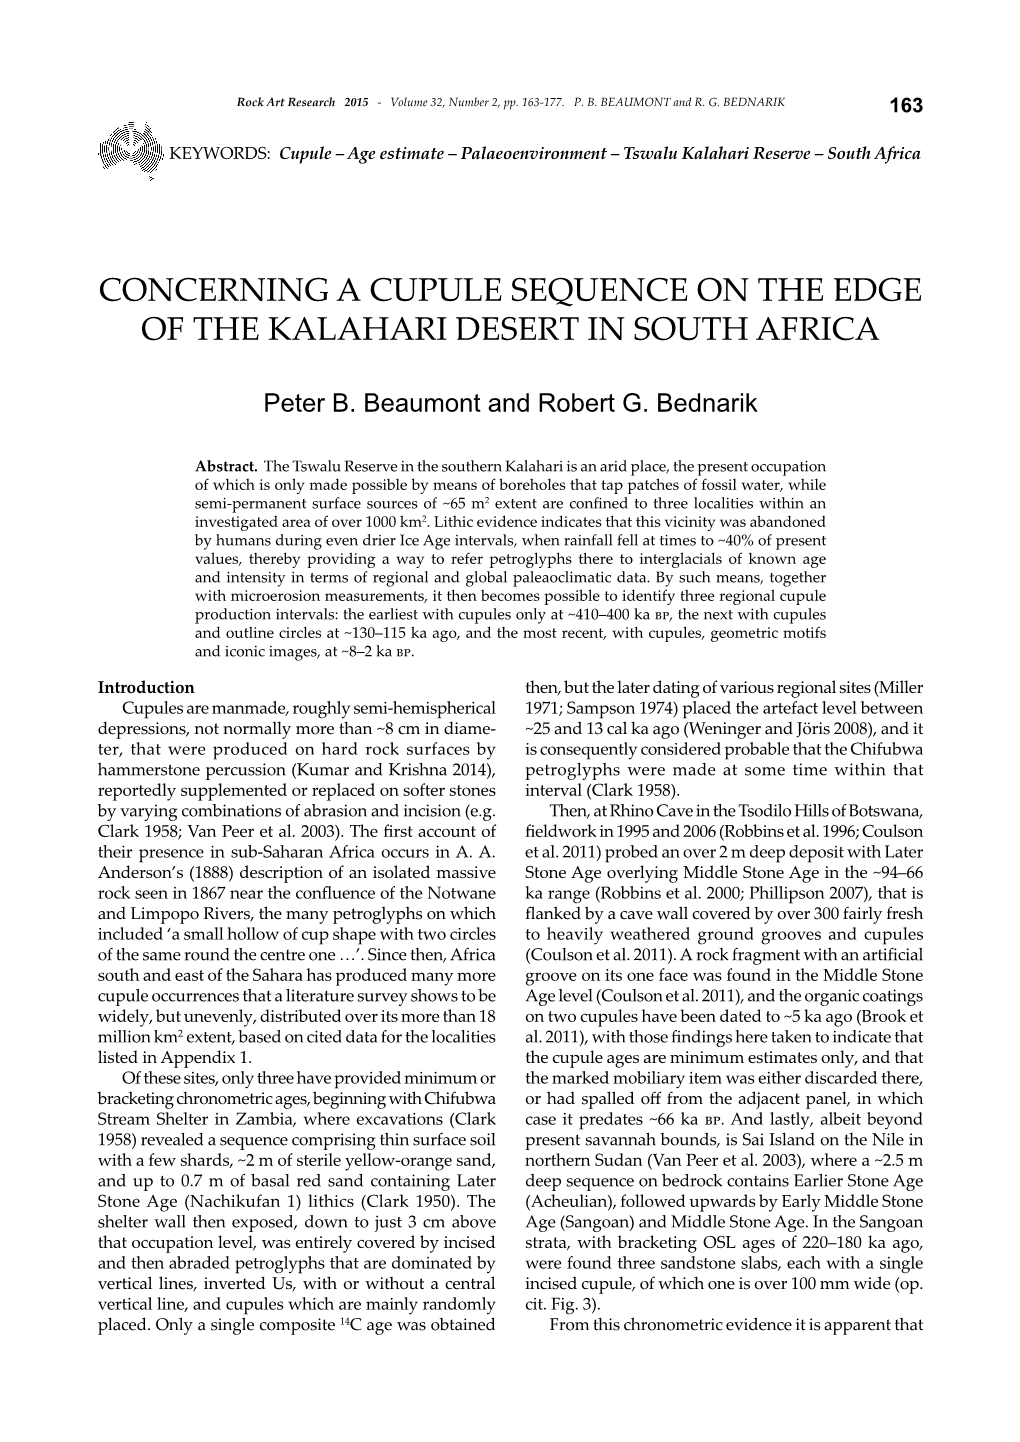 Concerning a Cupule Sequence on the Edge of the Kalahari Desert in South Africa